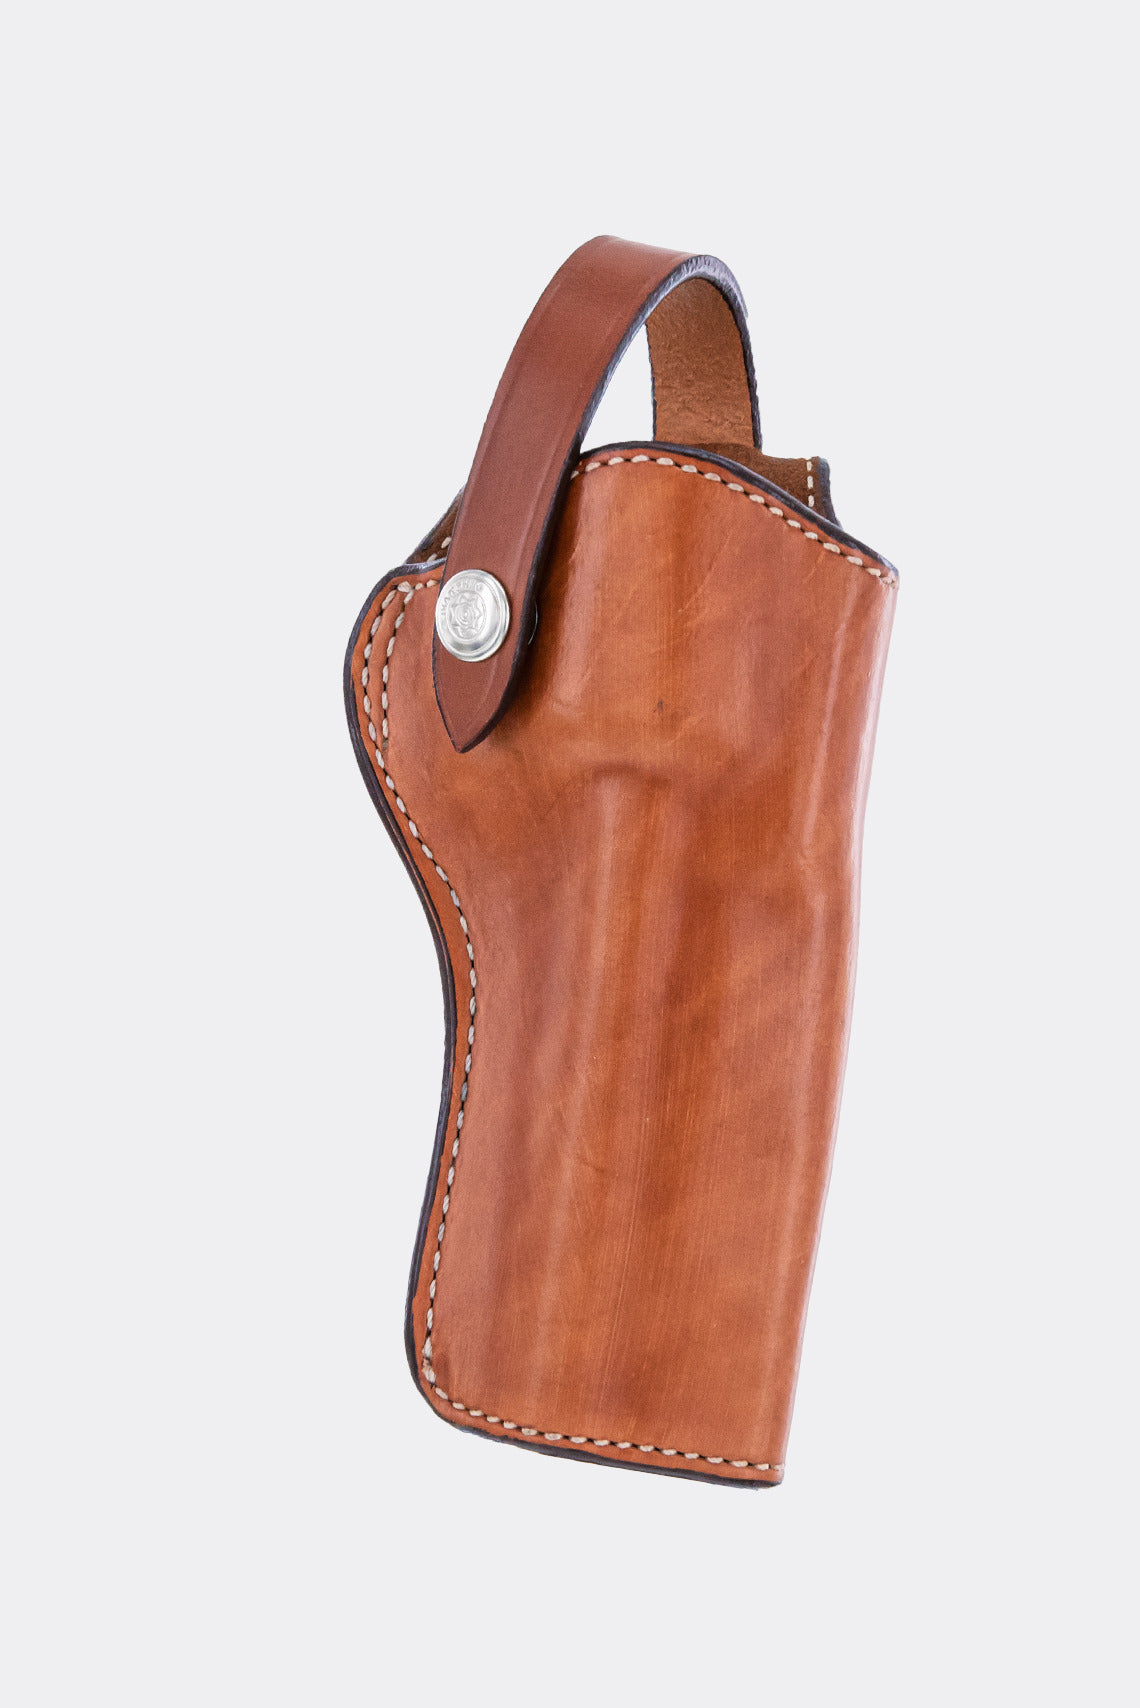 Western Cowboy Single Action Leather Holster Cross Draw RH 